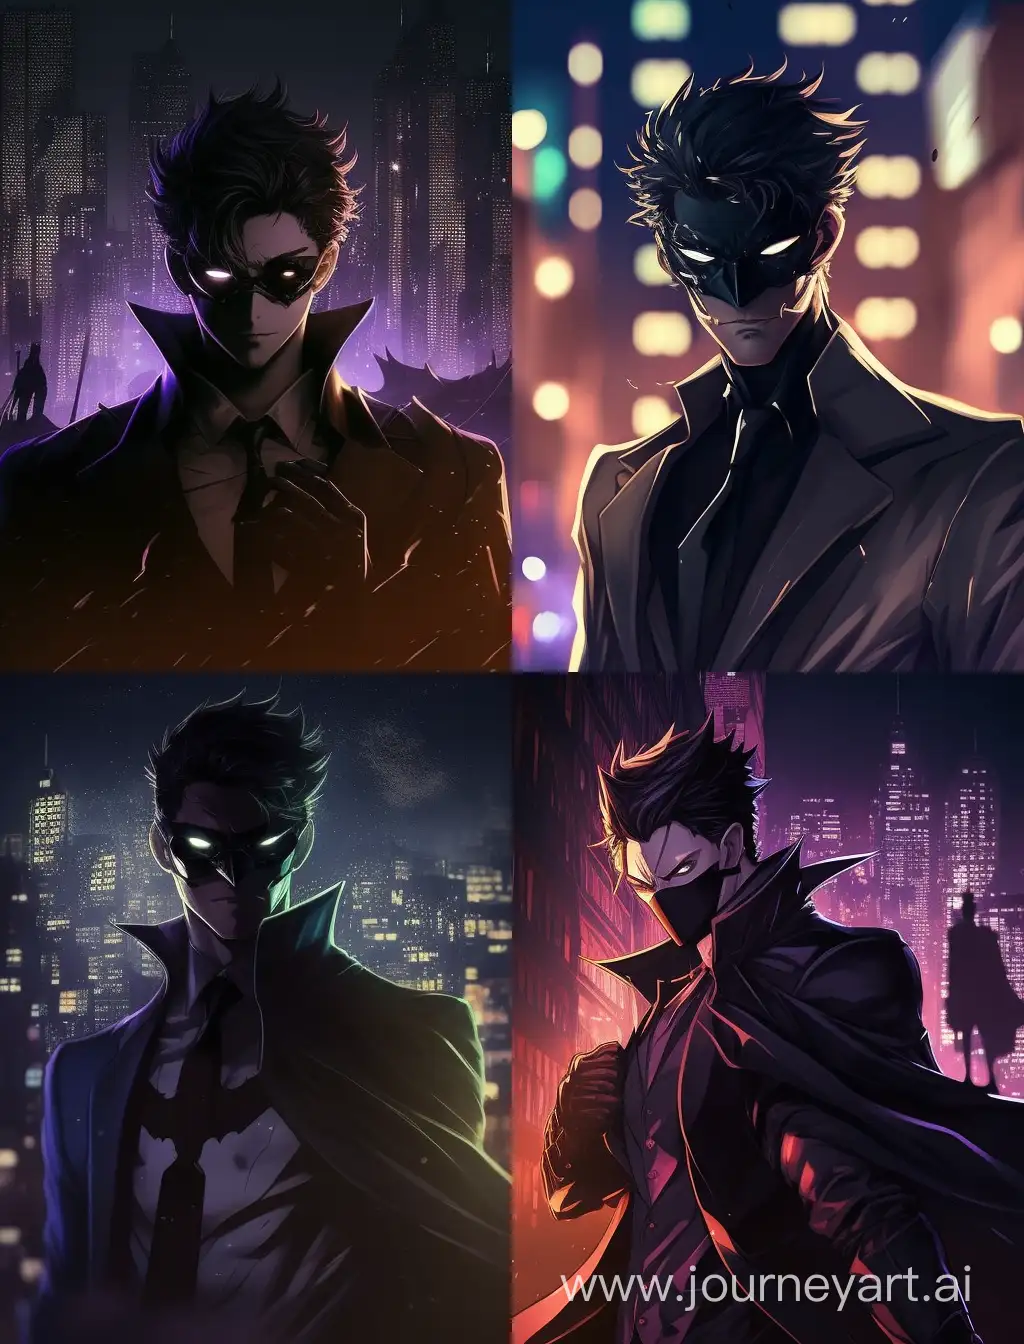 Mysterious-Man-in-Anime-Style-Suit-against-Bright-Night-Cityscape